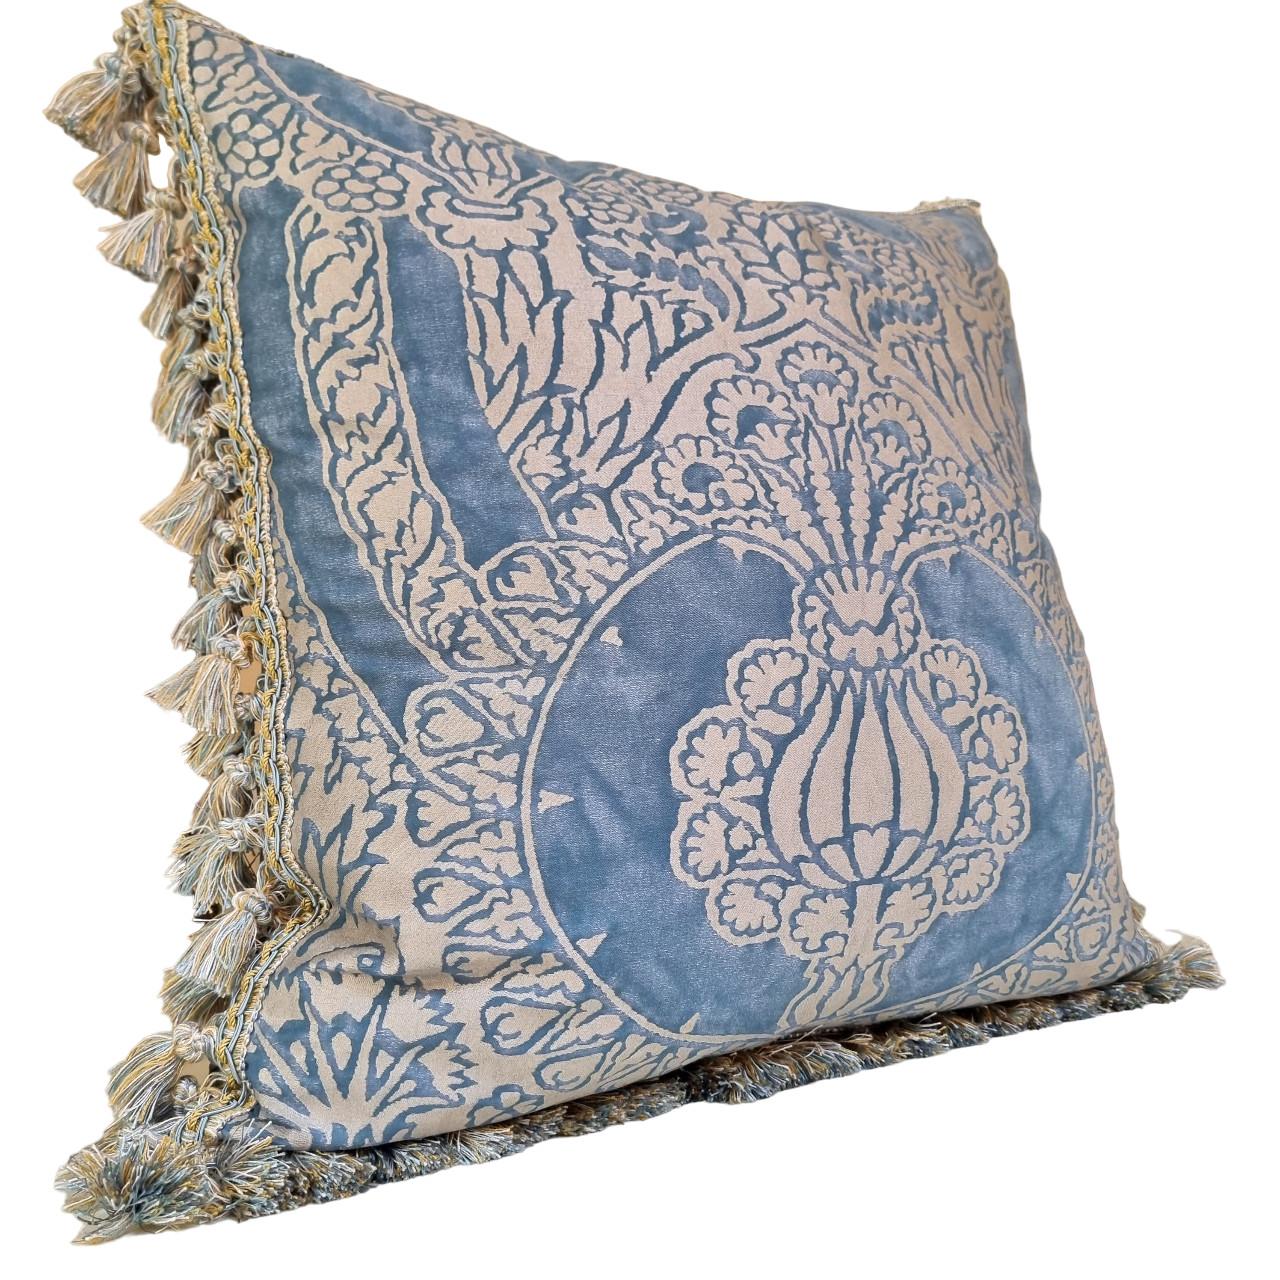 Double Sided Fortuny Fabric Pillow Tassel Trim Blue Silvery Gold Nicolo Pattern For Sale 1